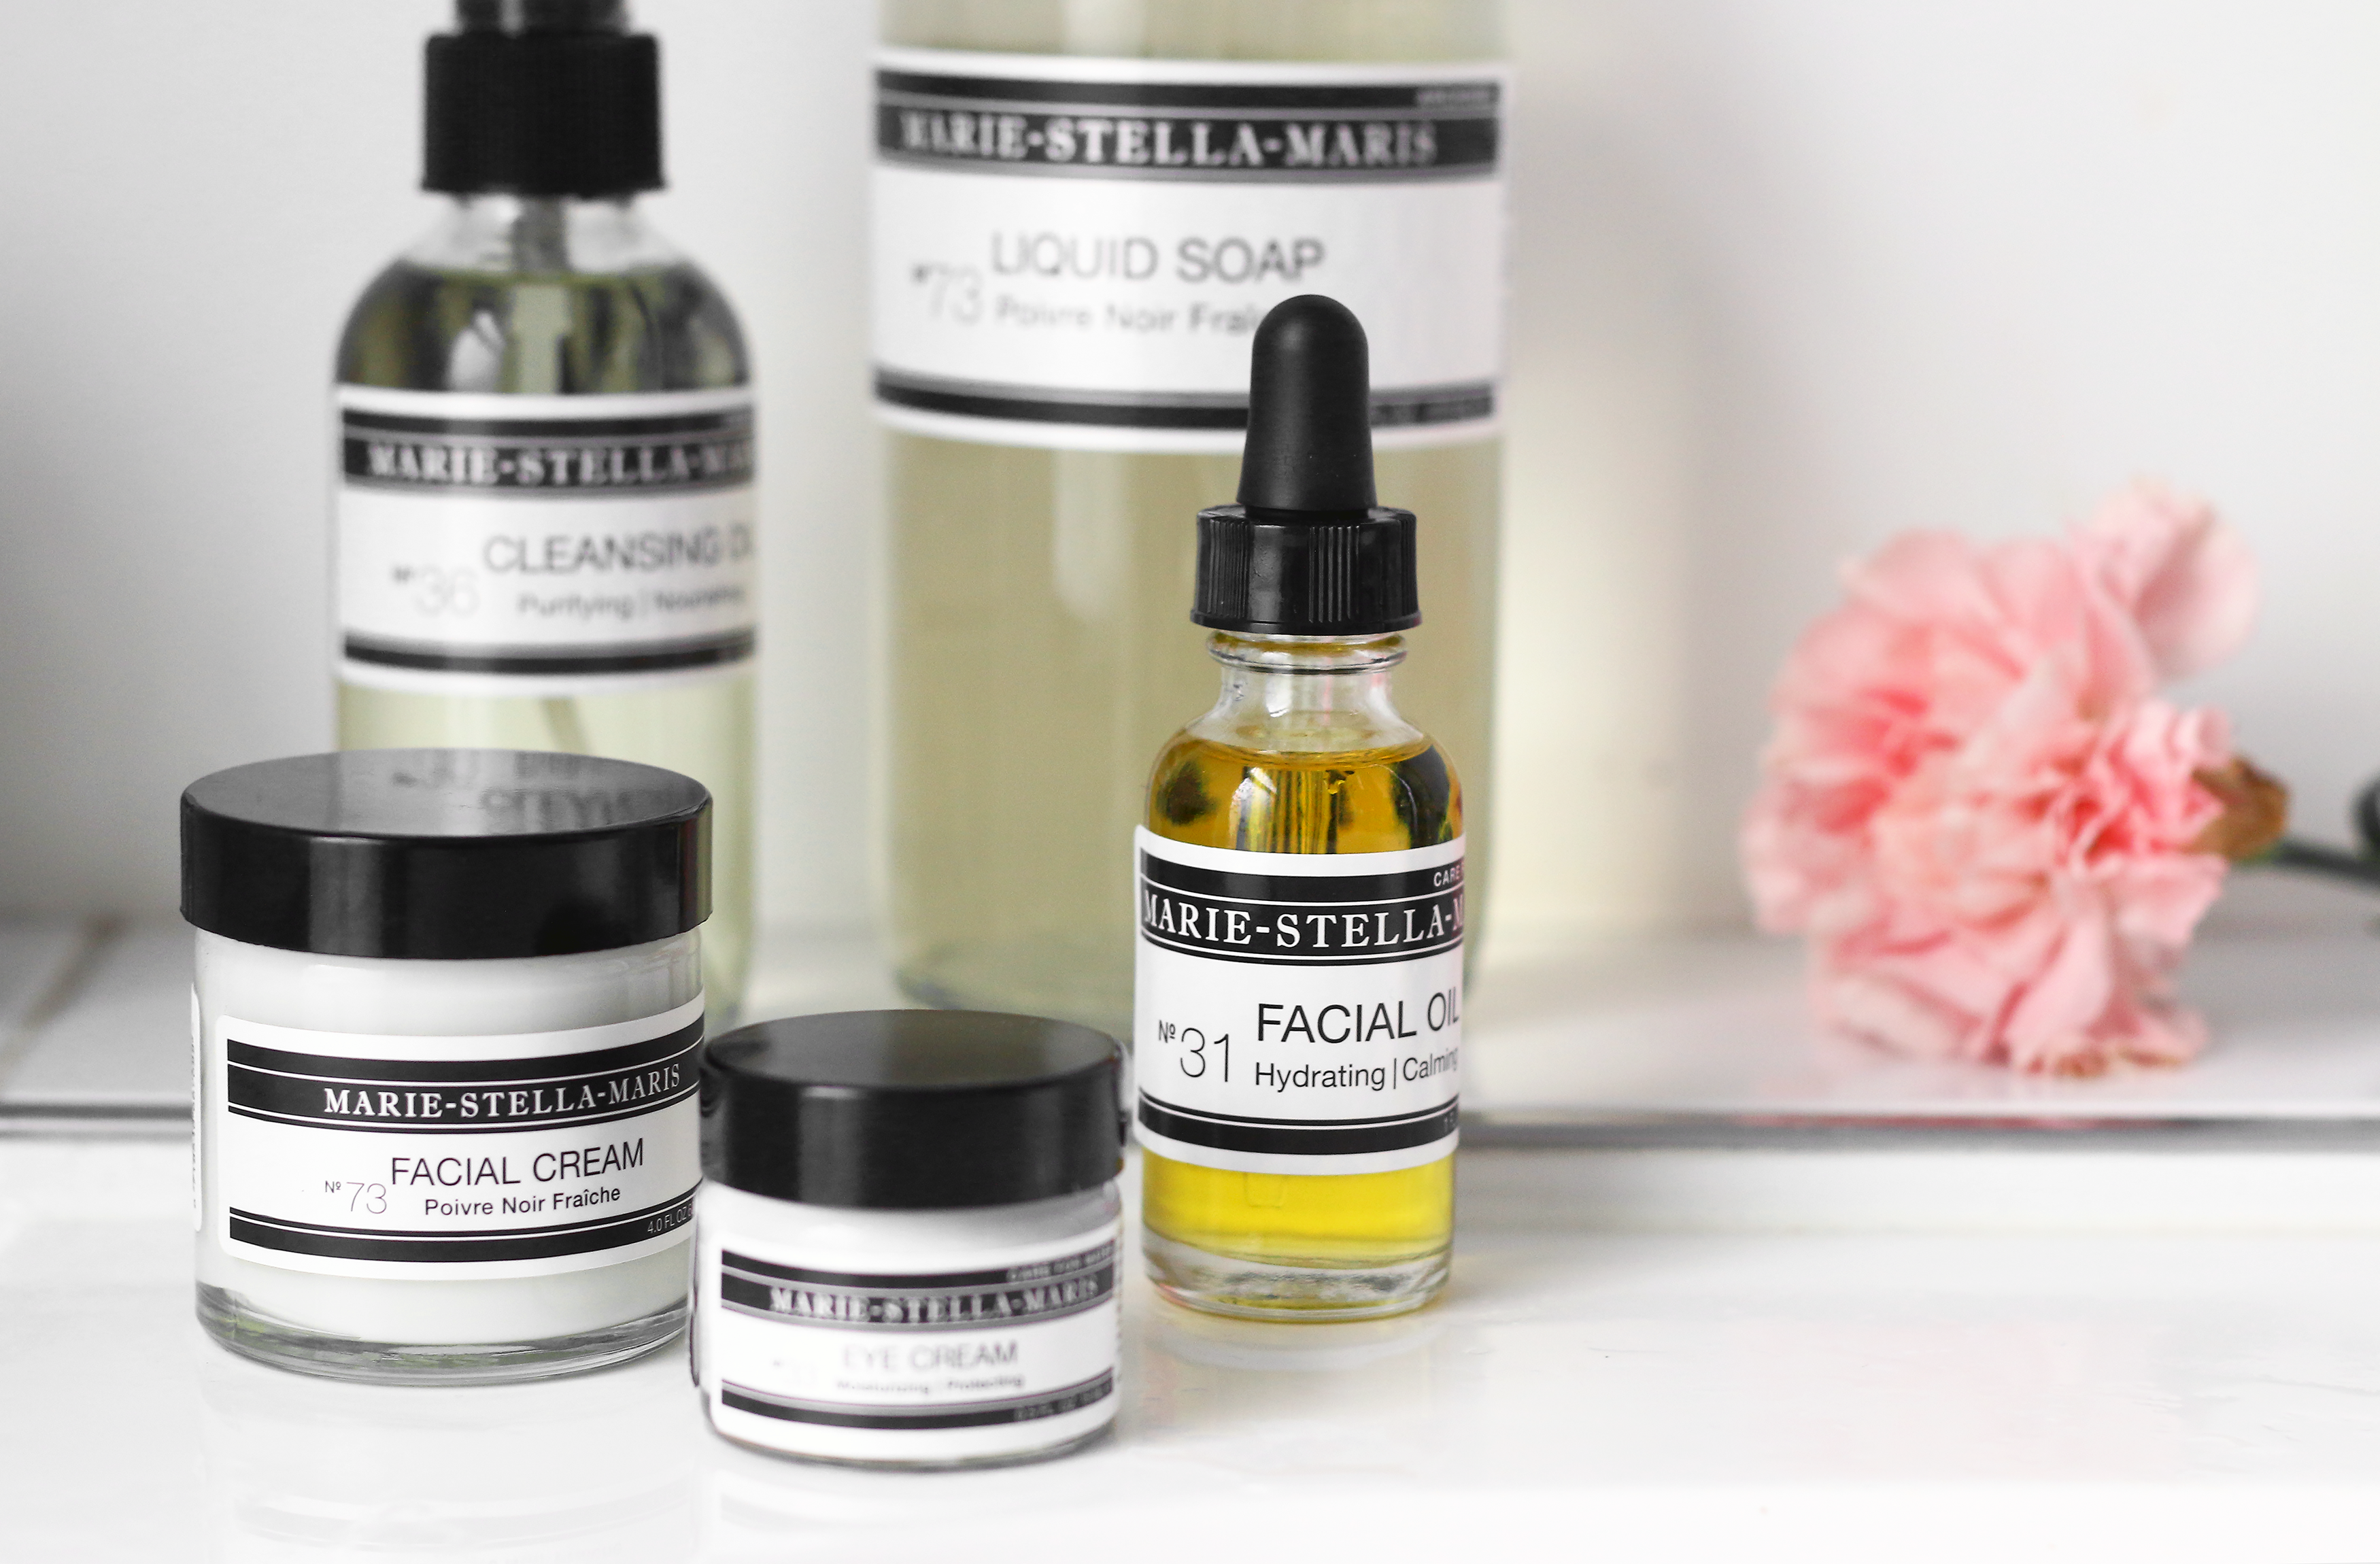 My favorite products from Marie-Stella-Maris